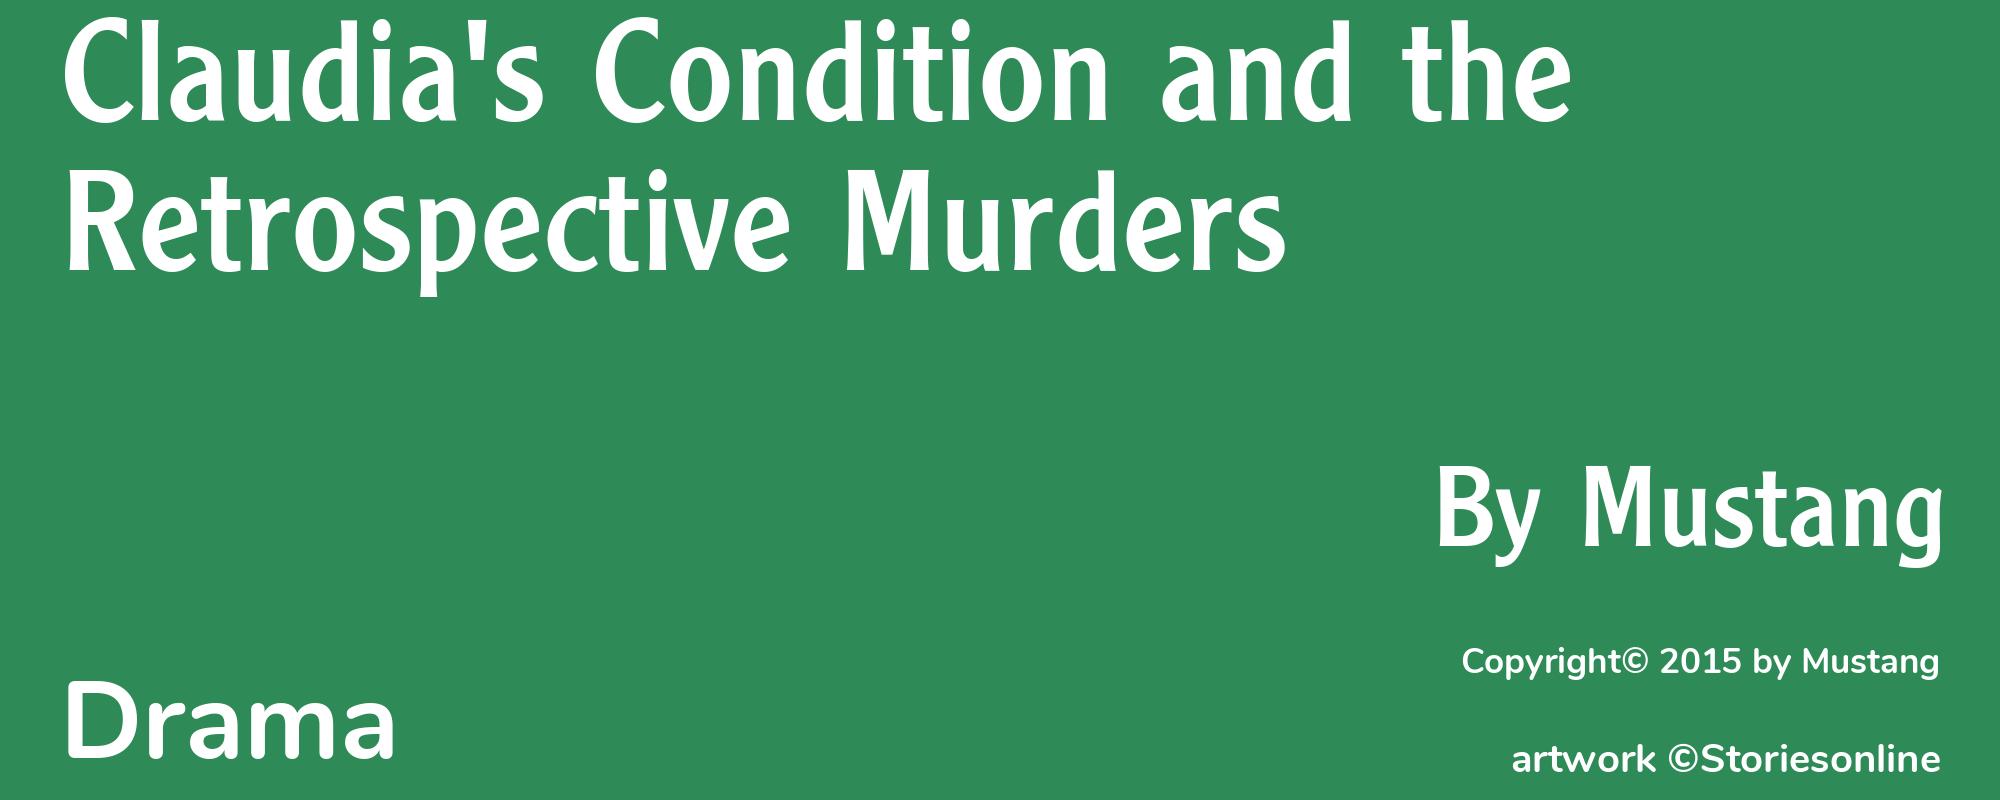 Claudia's Condition and the Retrospective Murders - Cover